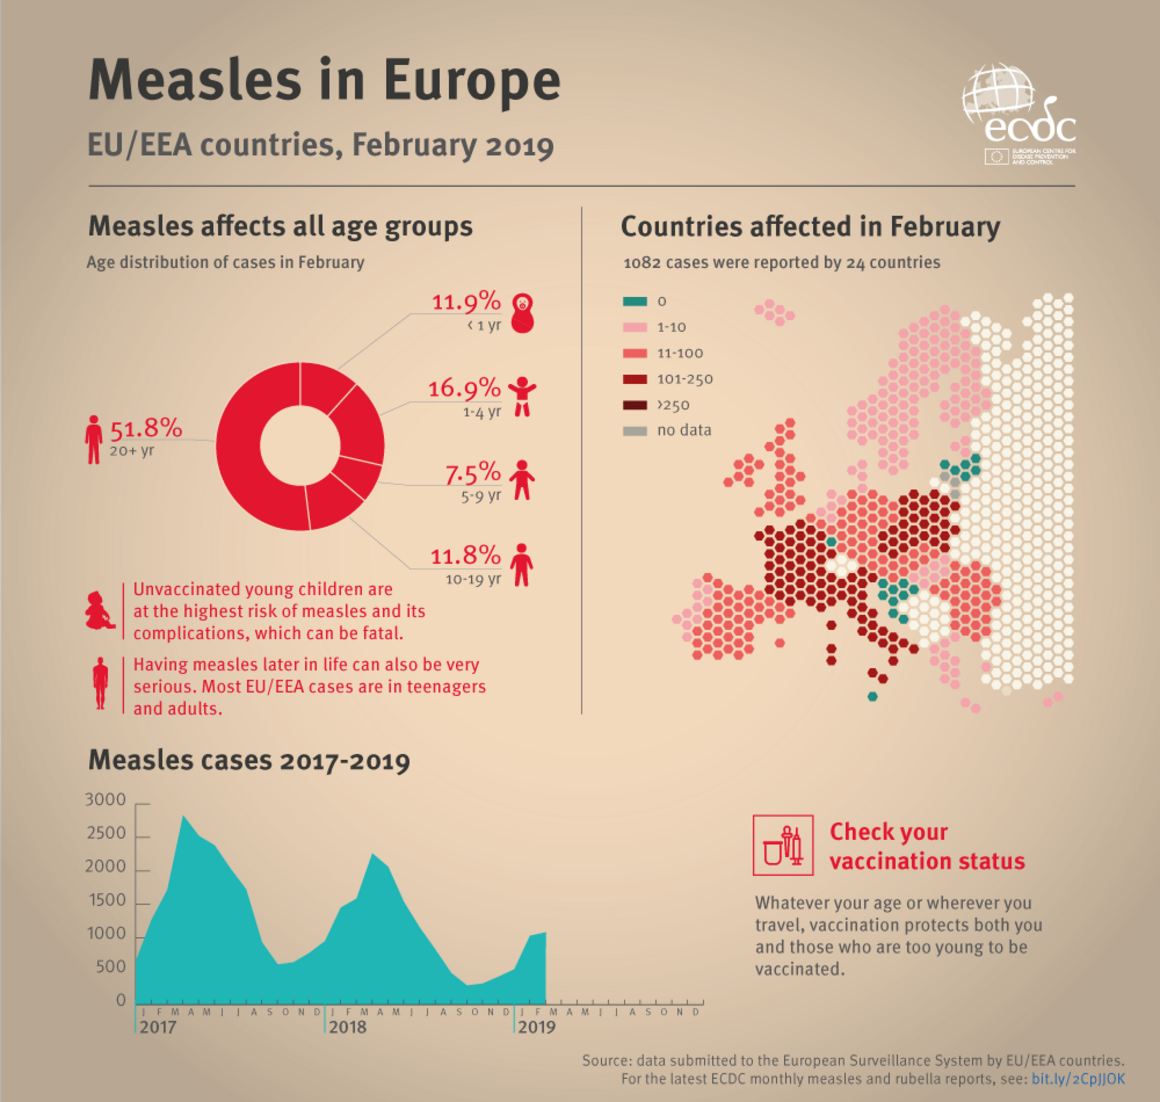 Infographic on measles cases in Europe, February 2019